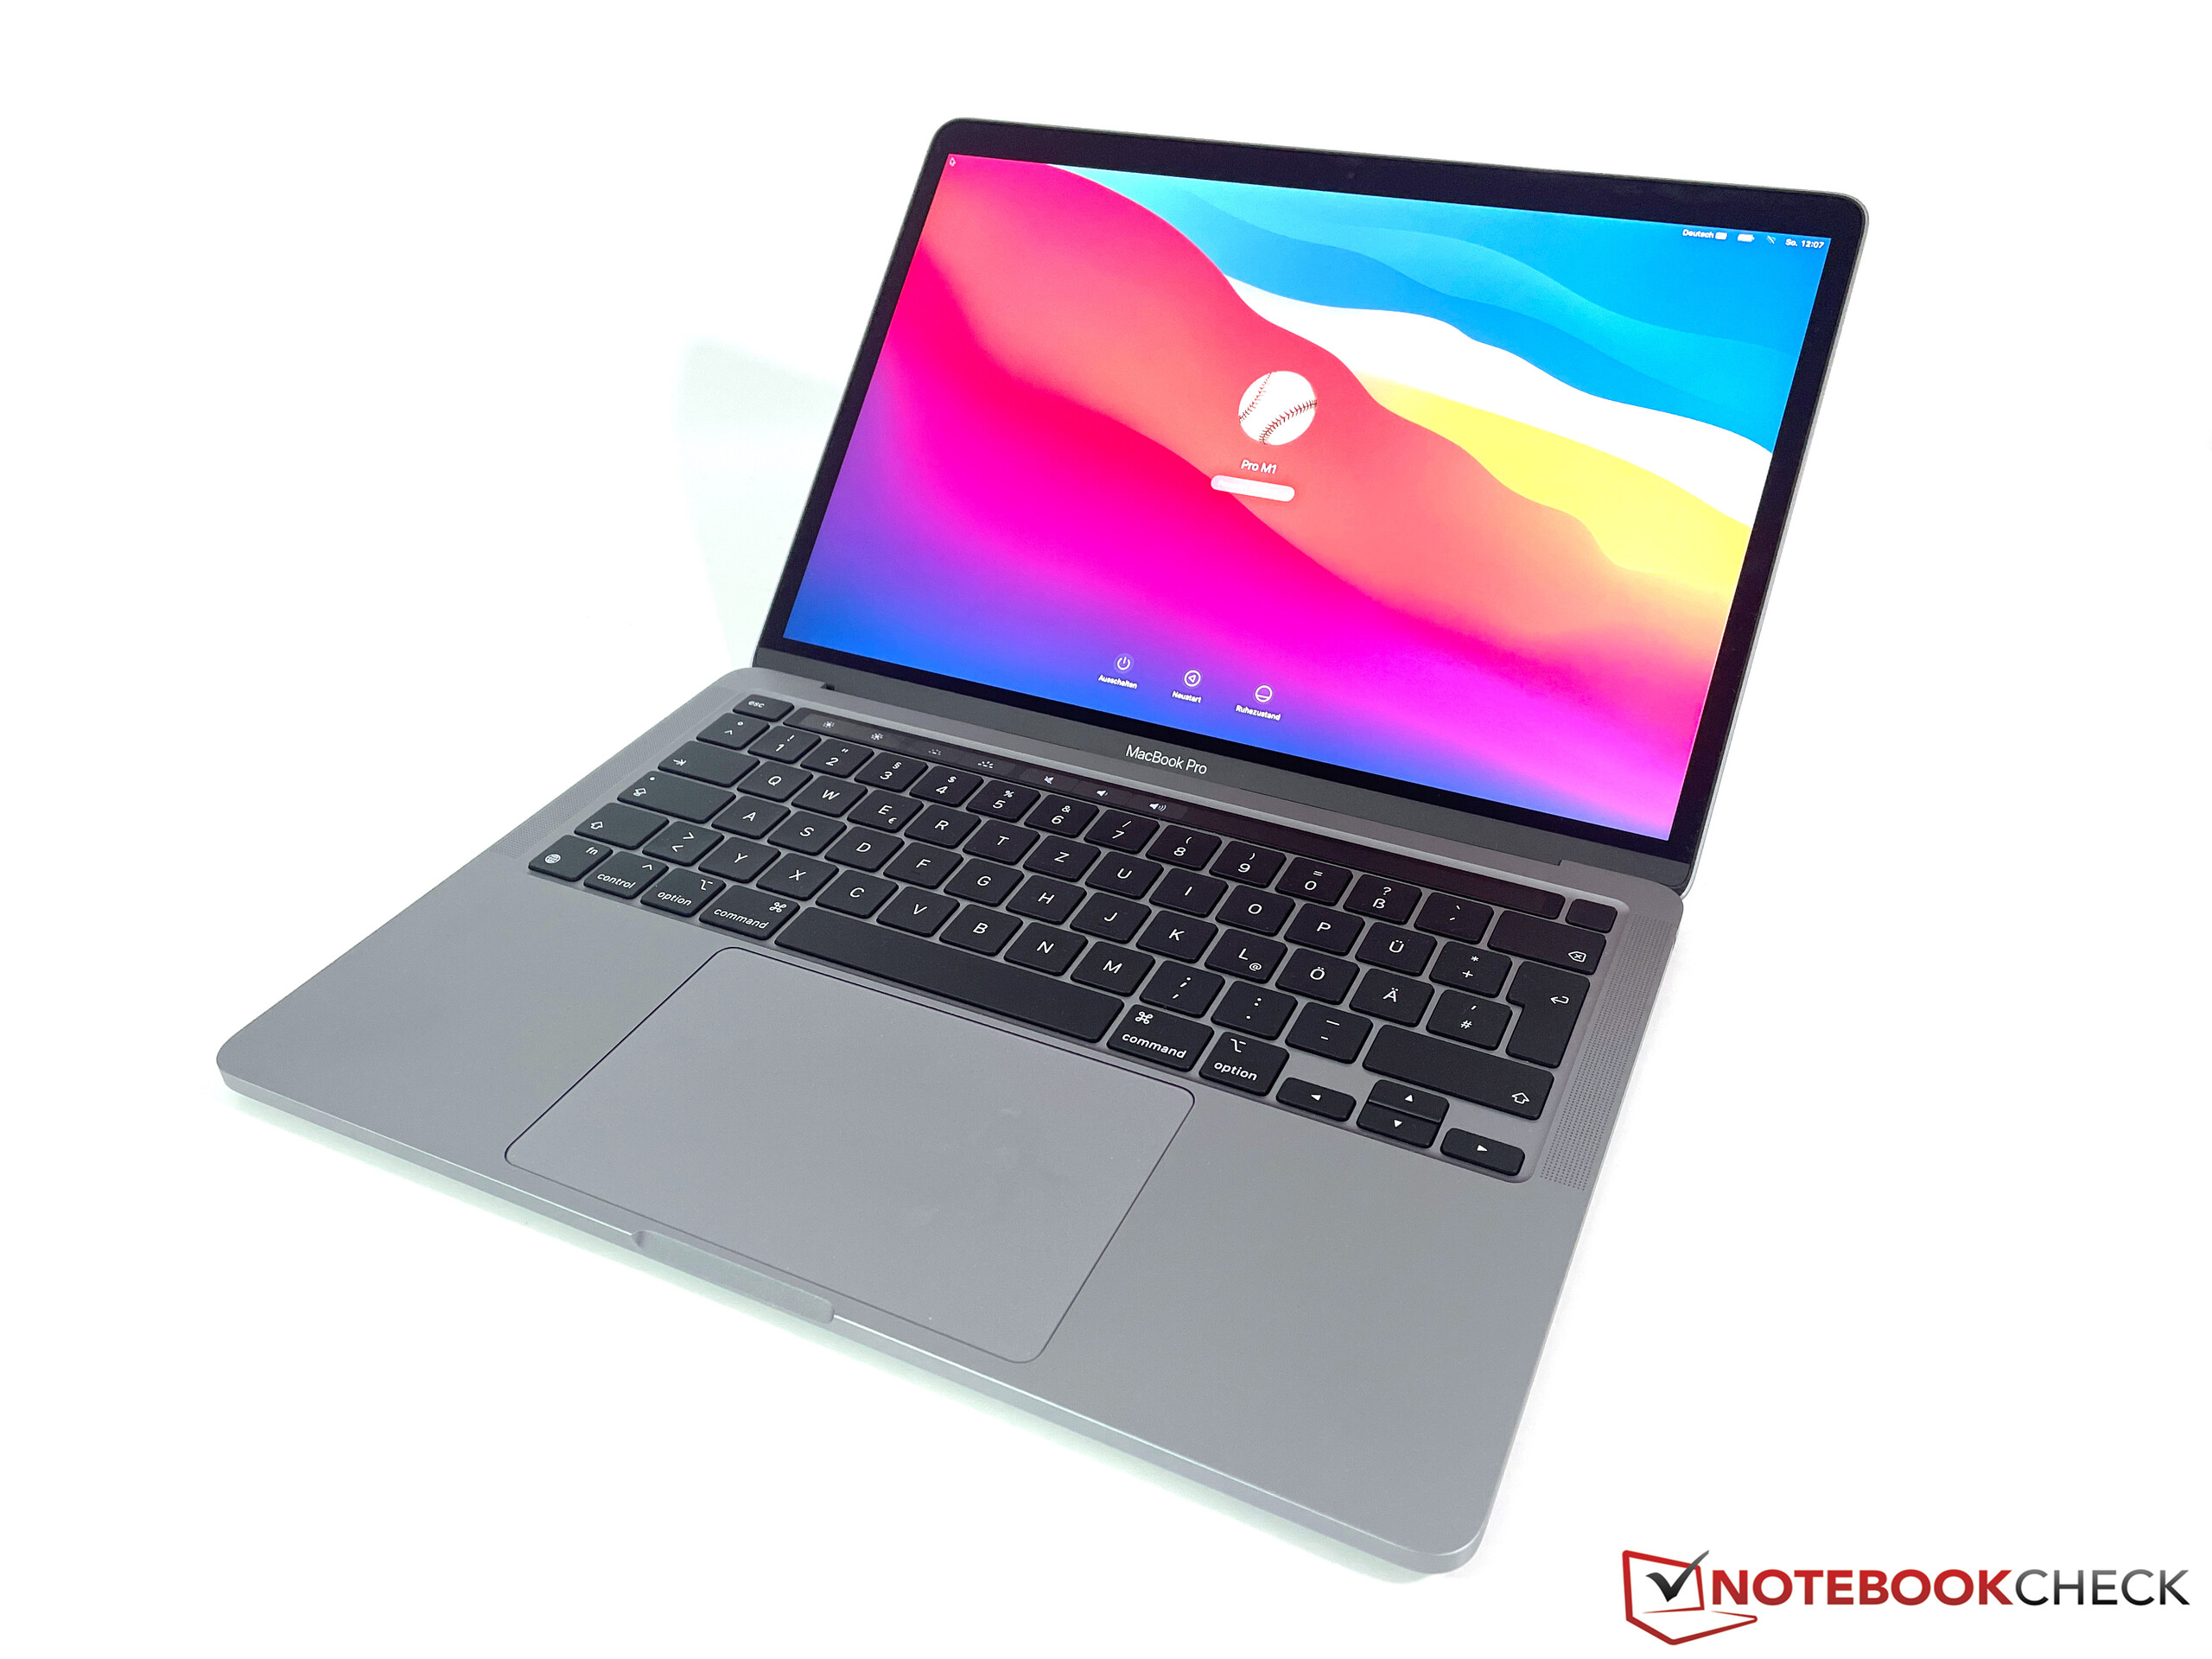 Apple MacBook Pro 13 2020 Laptop Review: The entry-level Pro also 